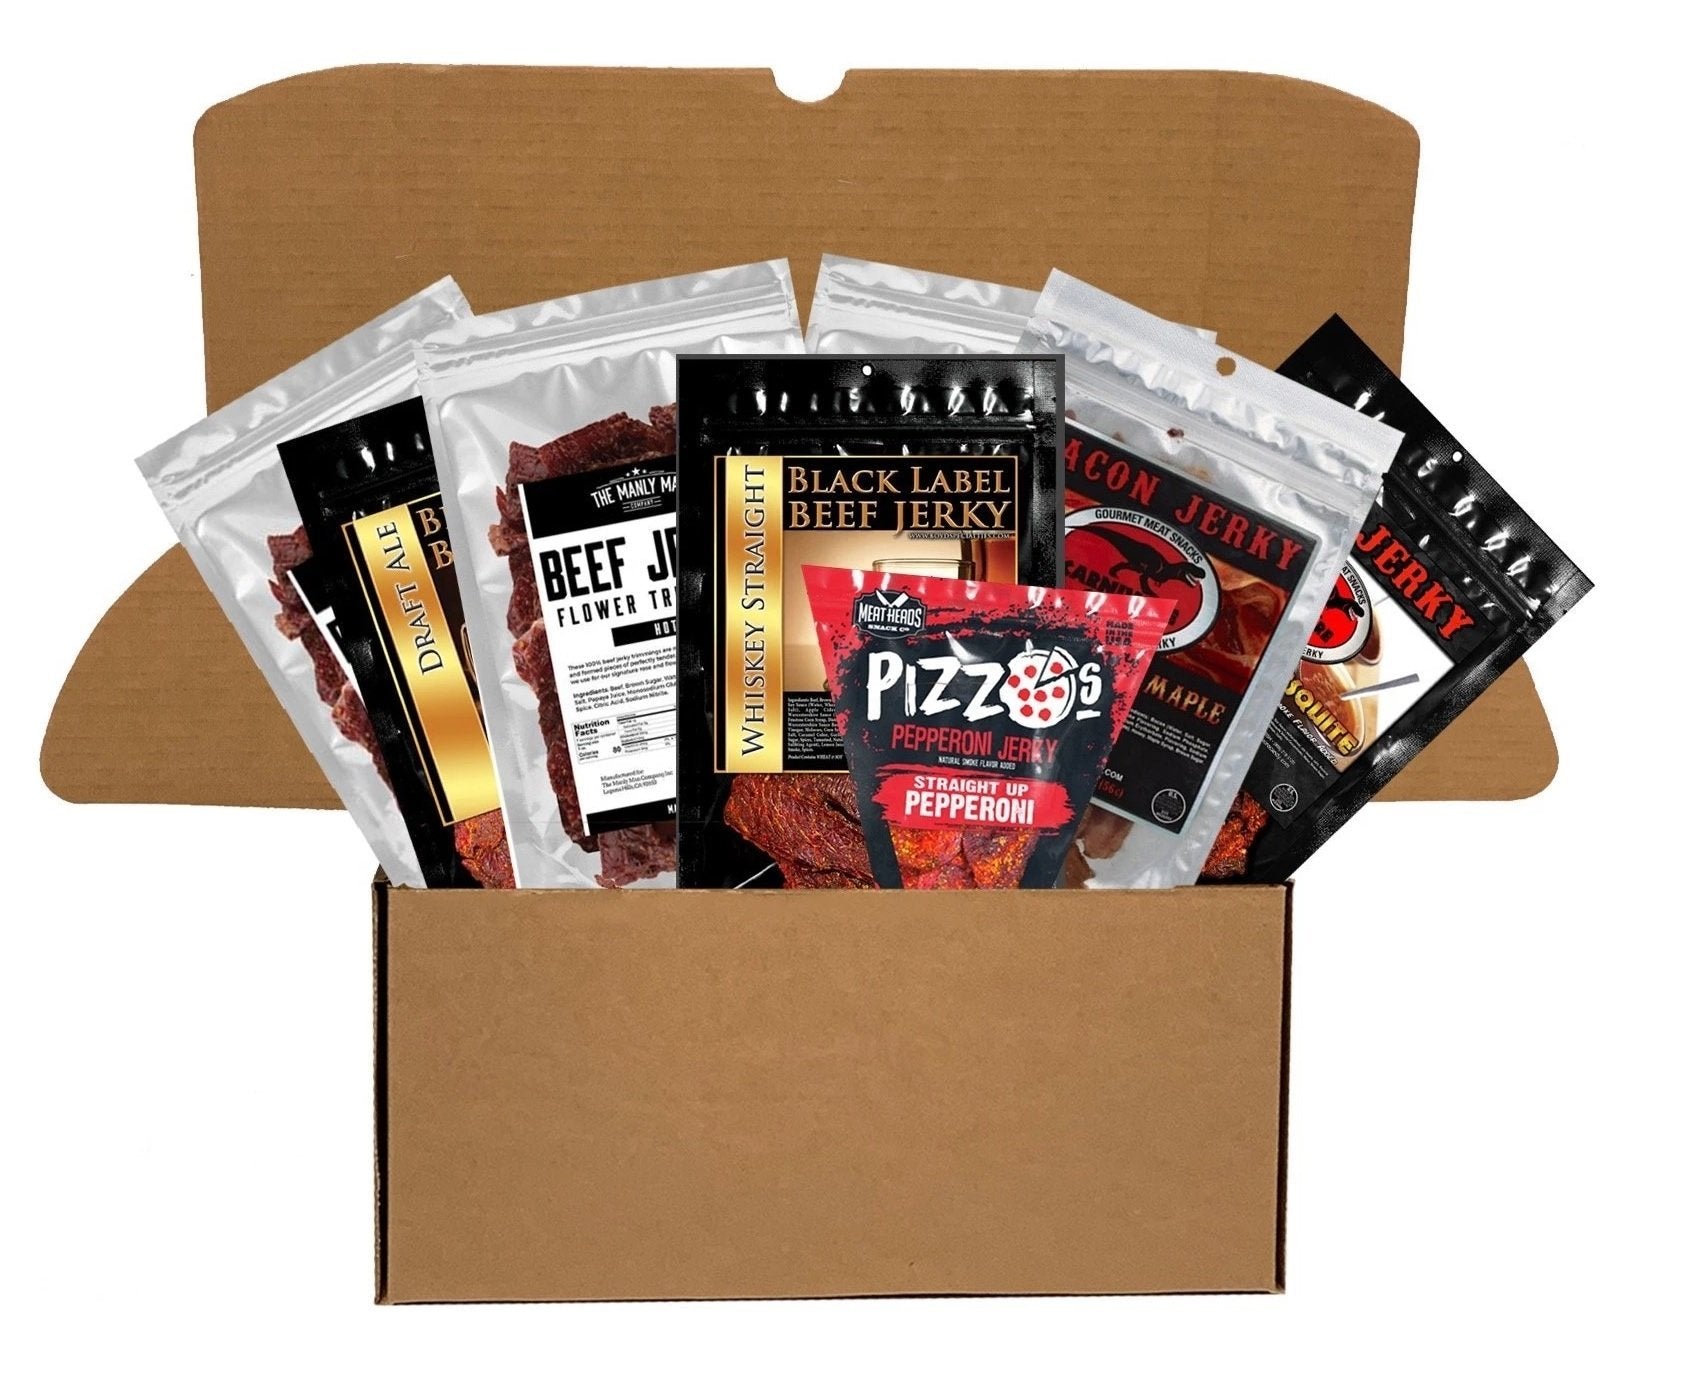 This  gift set features a wide variety of jerky meats and flavors.